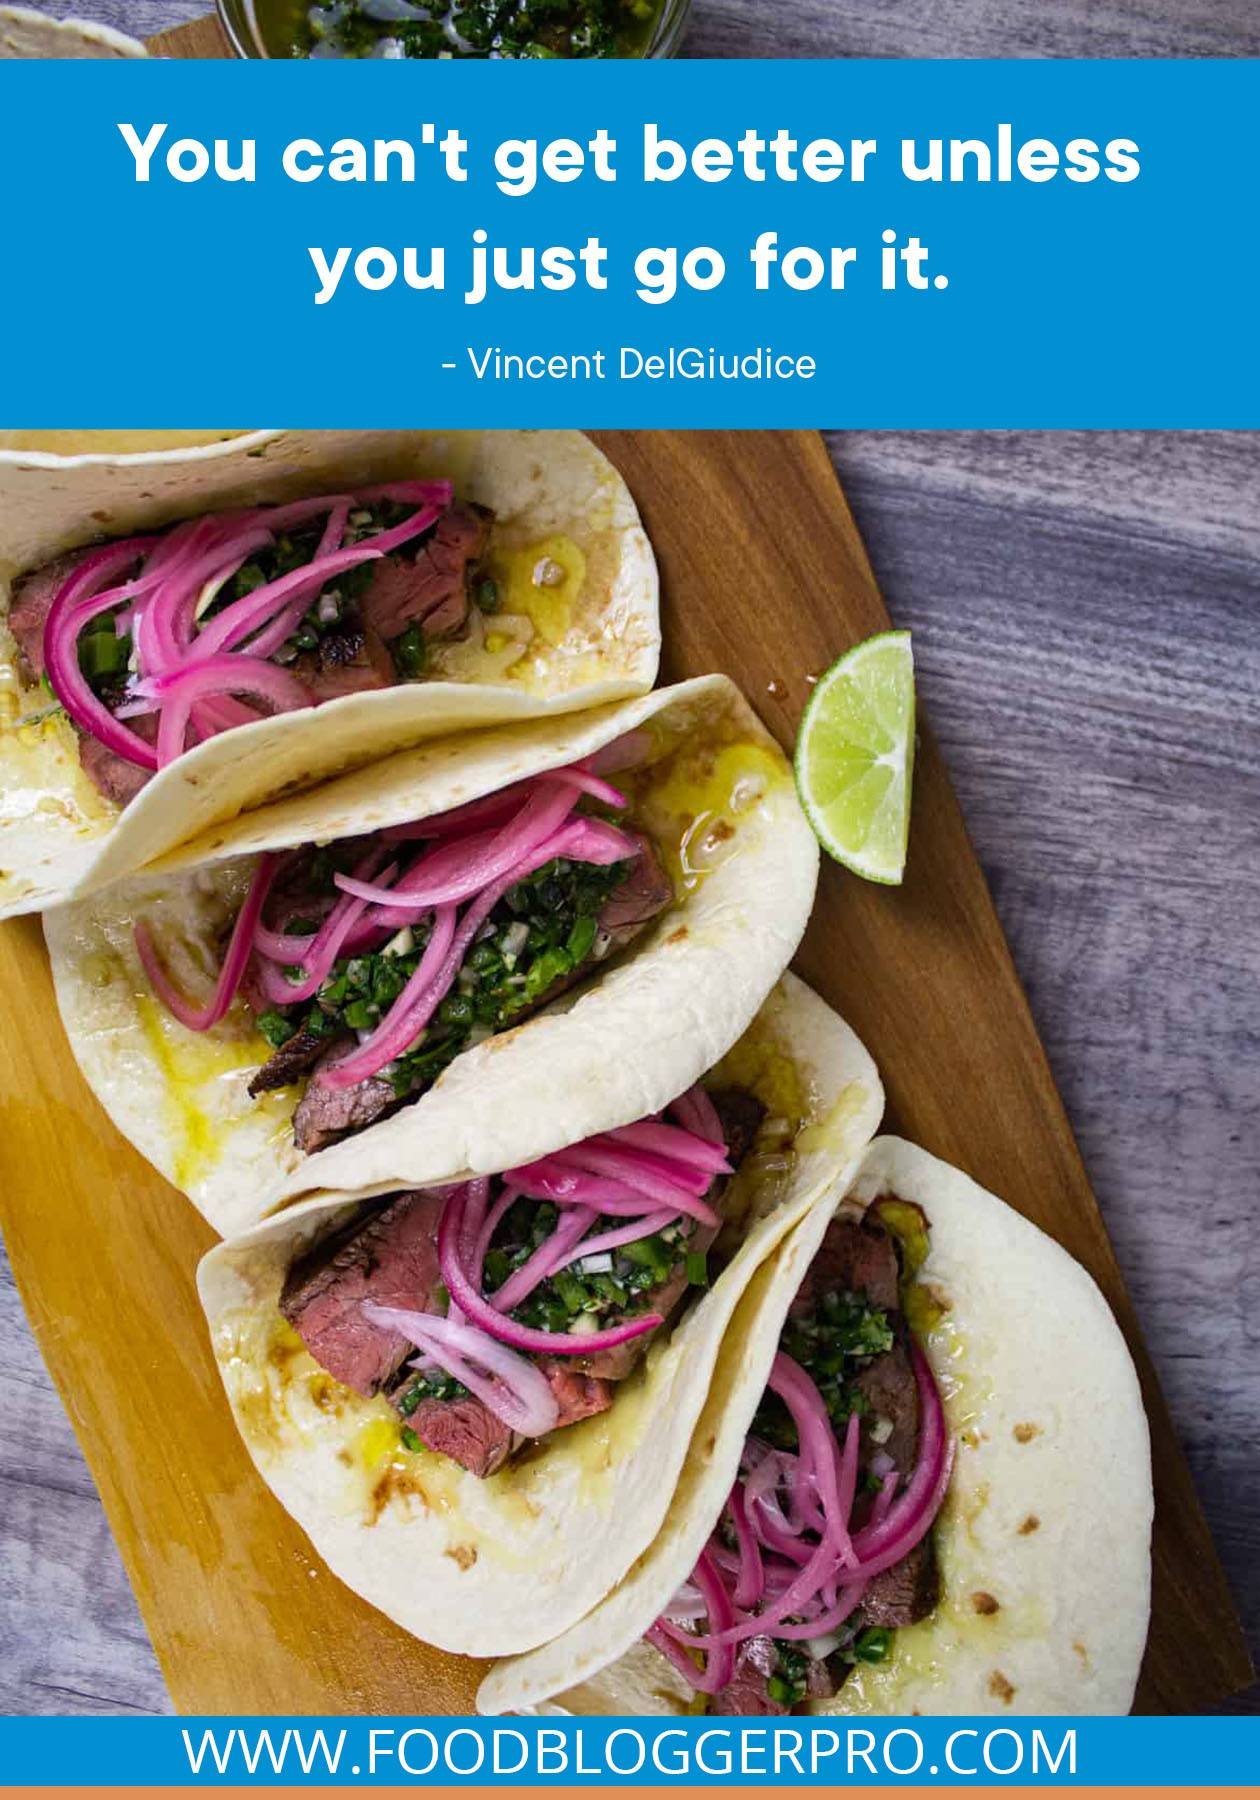 A photograph of steak tacos with a quote from Vincent DelGuidice's episode of The Food Blogger Pro Podcast that reads: "You can't get better unless you just go for it."